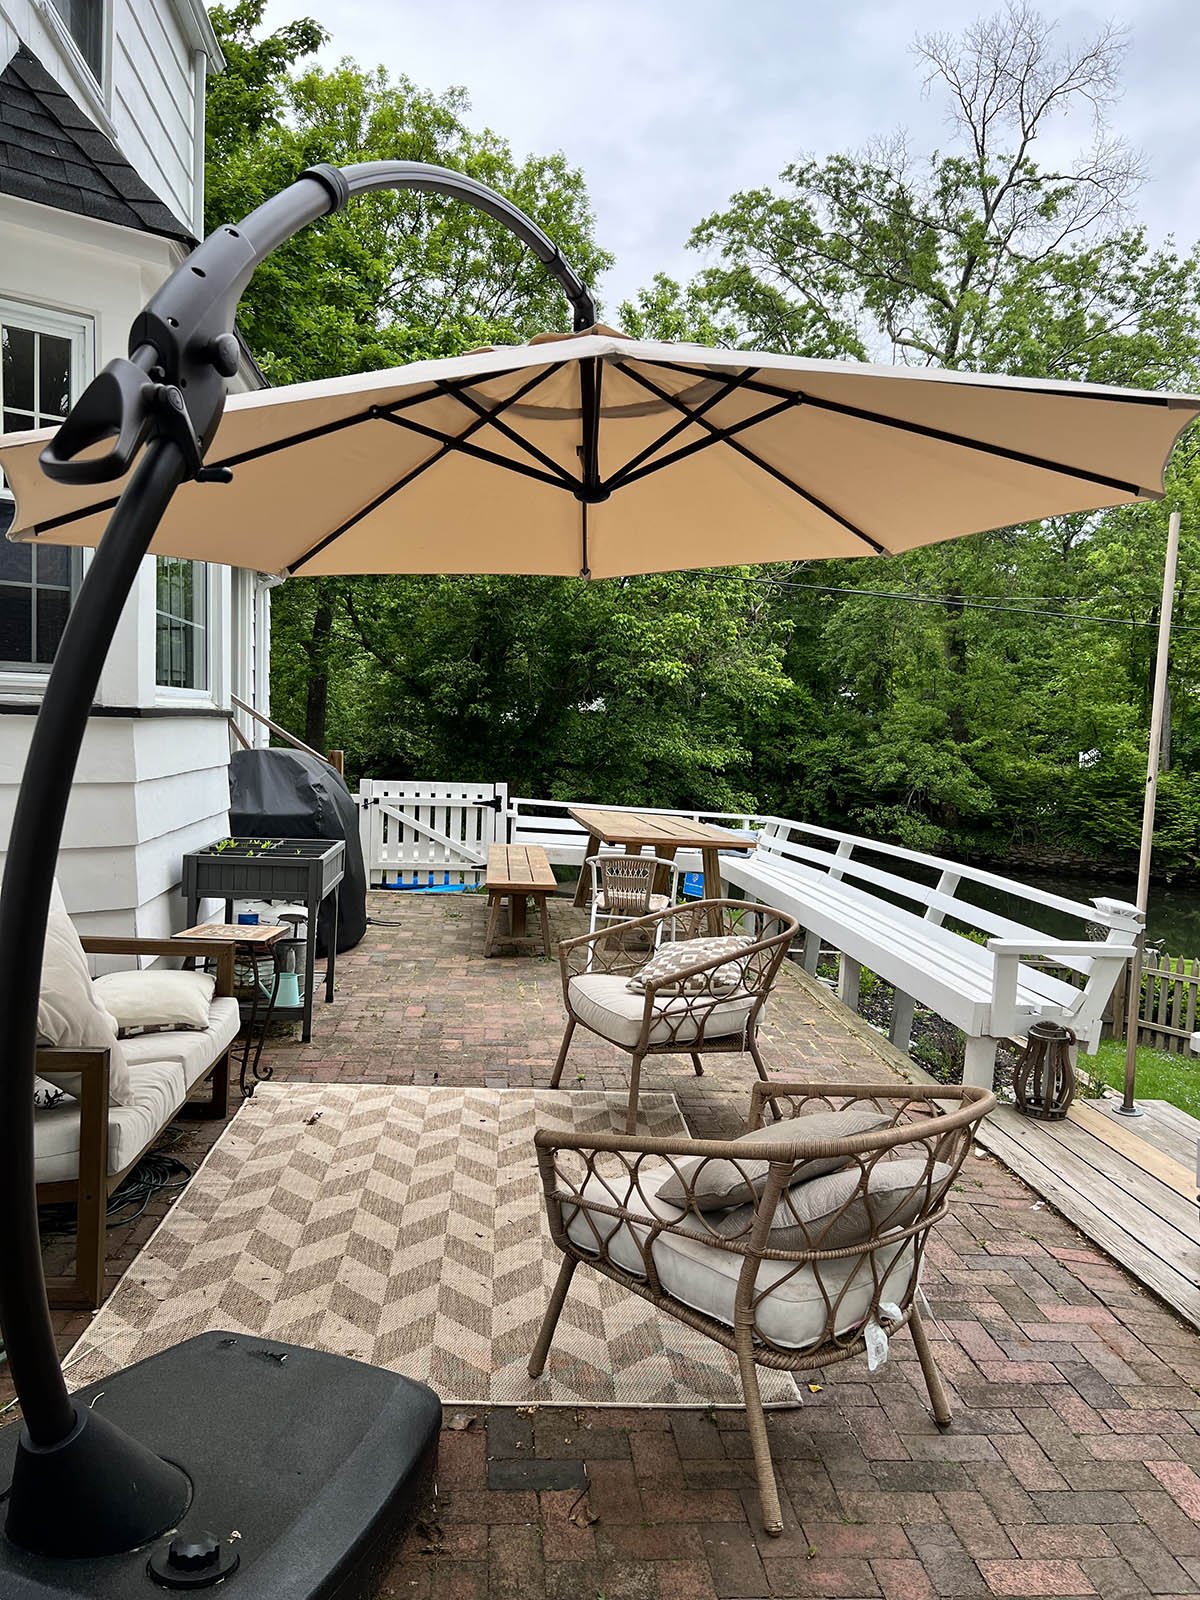 The best patio umbrella option set up in the corner of a deck to provide shade for two outdoor chairs and a couch